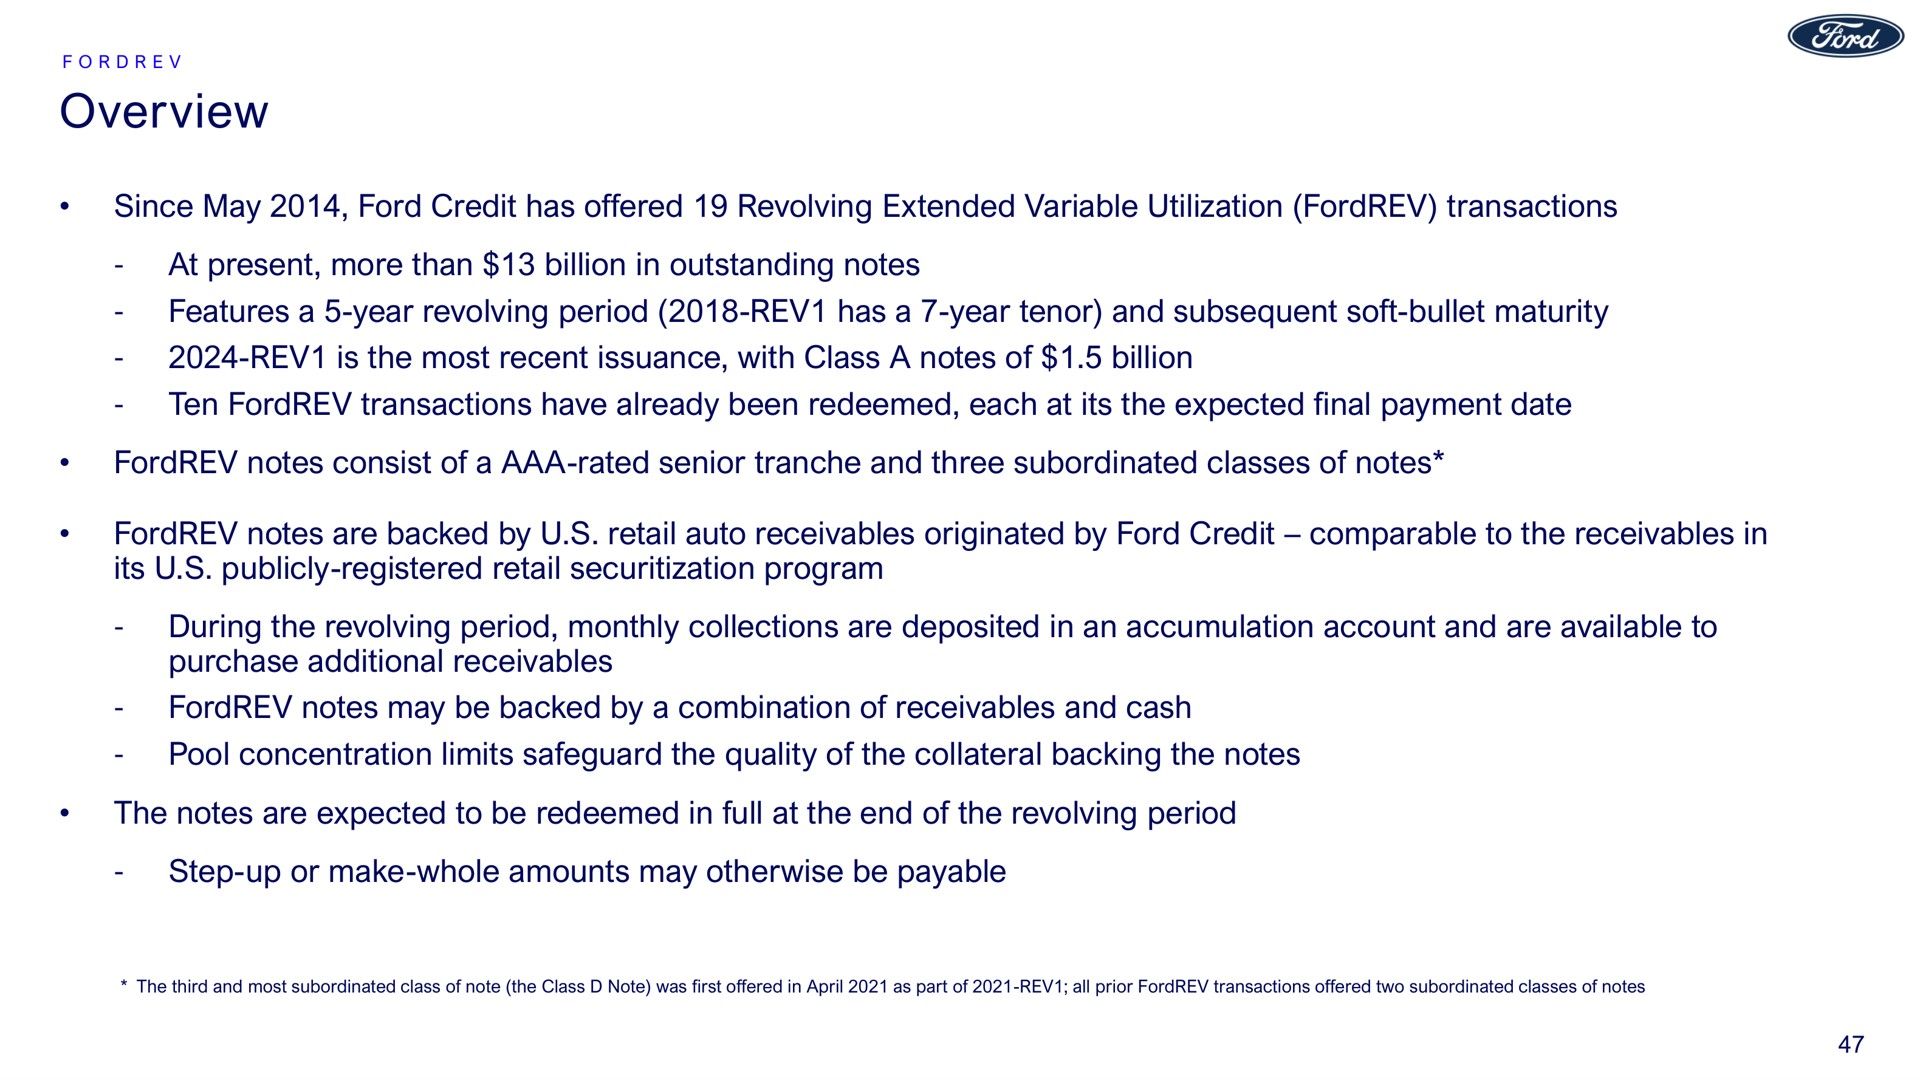 overview since may ford credit has offered revolving extended variable utilization transactions at present more than billion in outstanding notes features a year revolving period rev has a year tenor and subsequent soft bullet maturity rev is the most recent issuance with class a notes of billion ten transactions have already been redeemed each at its the expected final payment date notes consist of a rated senior and three subordinated classes of notes notes are backed by retail auto receivables originated by ford credit comparable to the receivables in its publicly registered retail program during the revolving period monthly collections are deposited in an accumulation account and are available to purchase additional receivables notes may be backed by a combination of receivables and cash pool concentration limits safeguard the quality of the collateral backing the notes the notes are expected to be redeemed in full at the end of the revolving period step up or make whole amounts may otherwise be payable | Ford